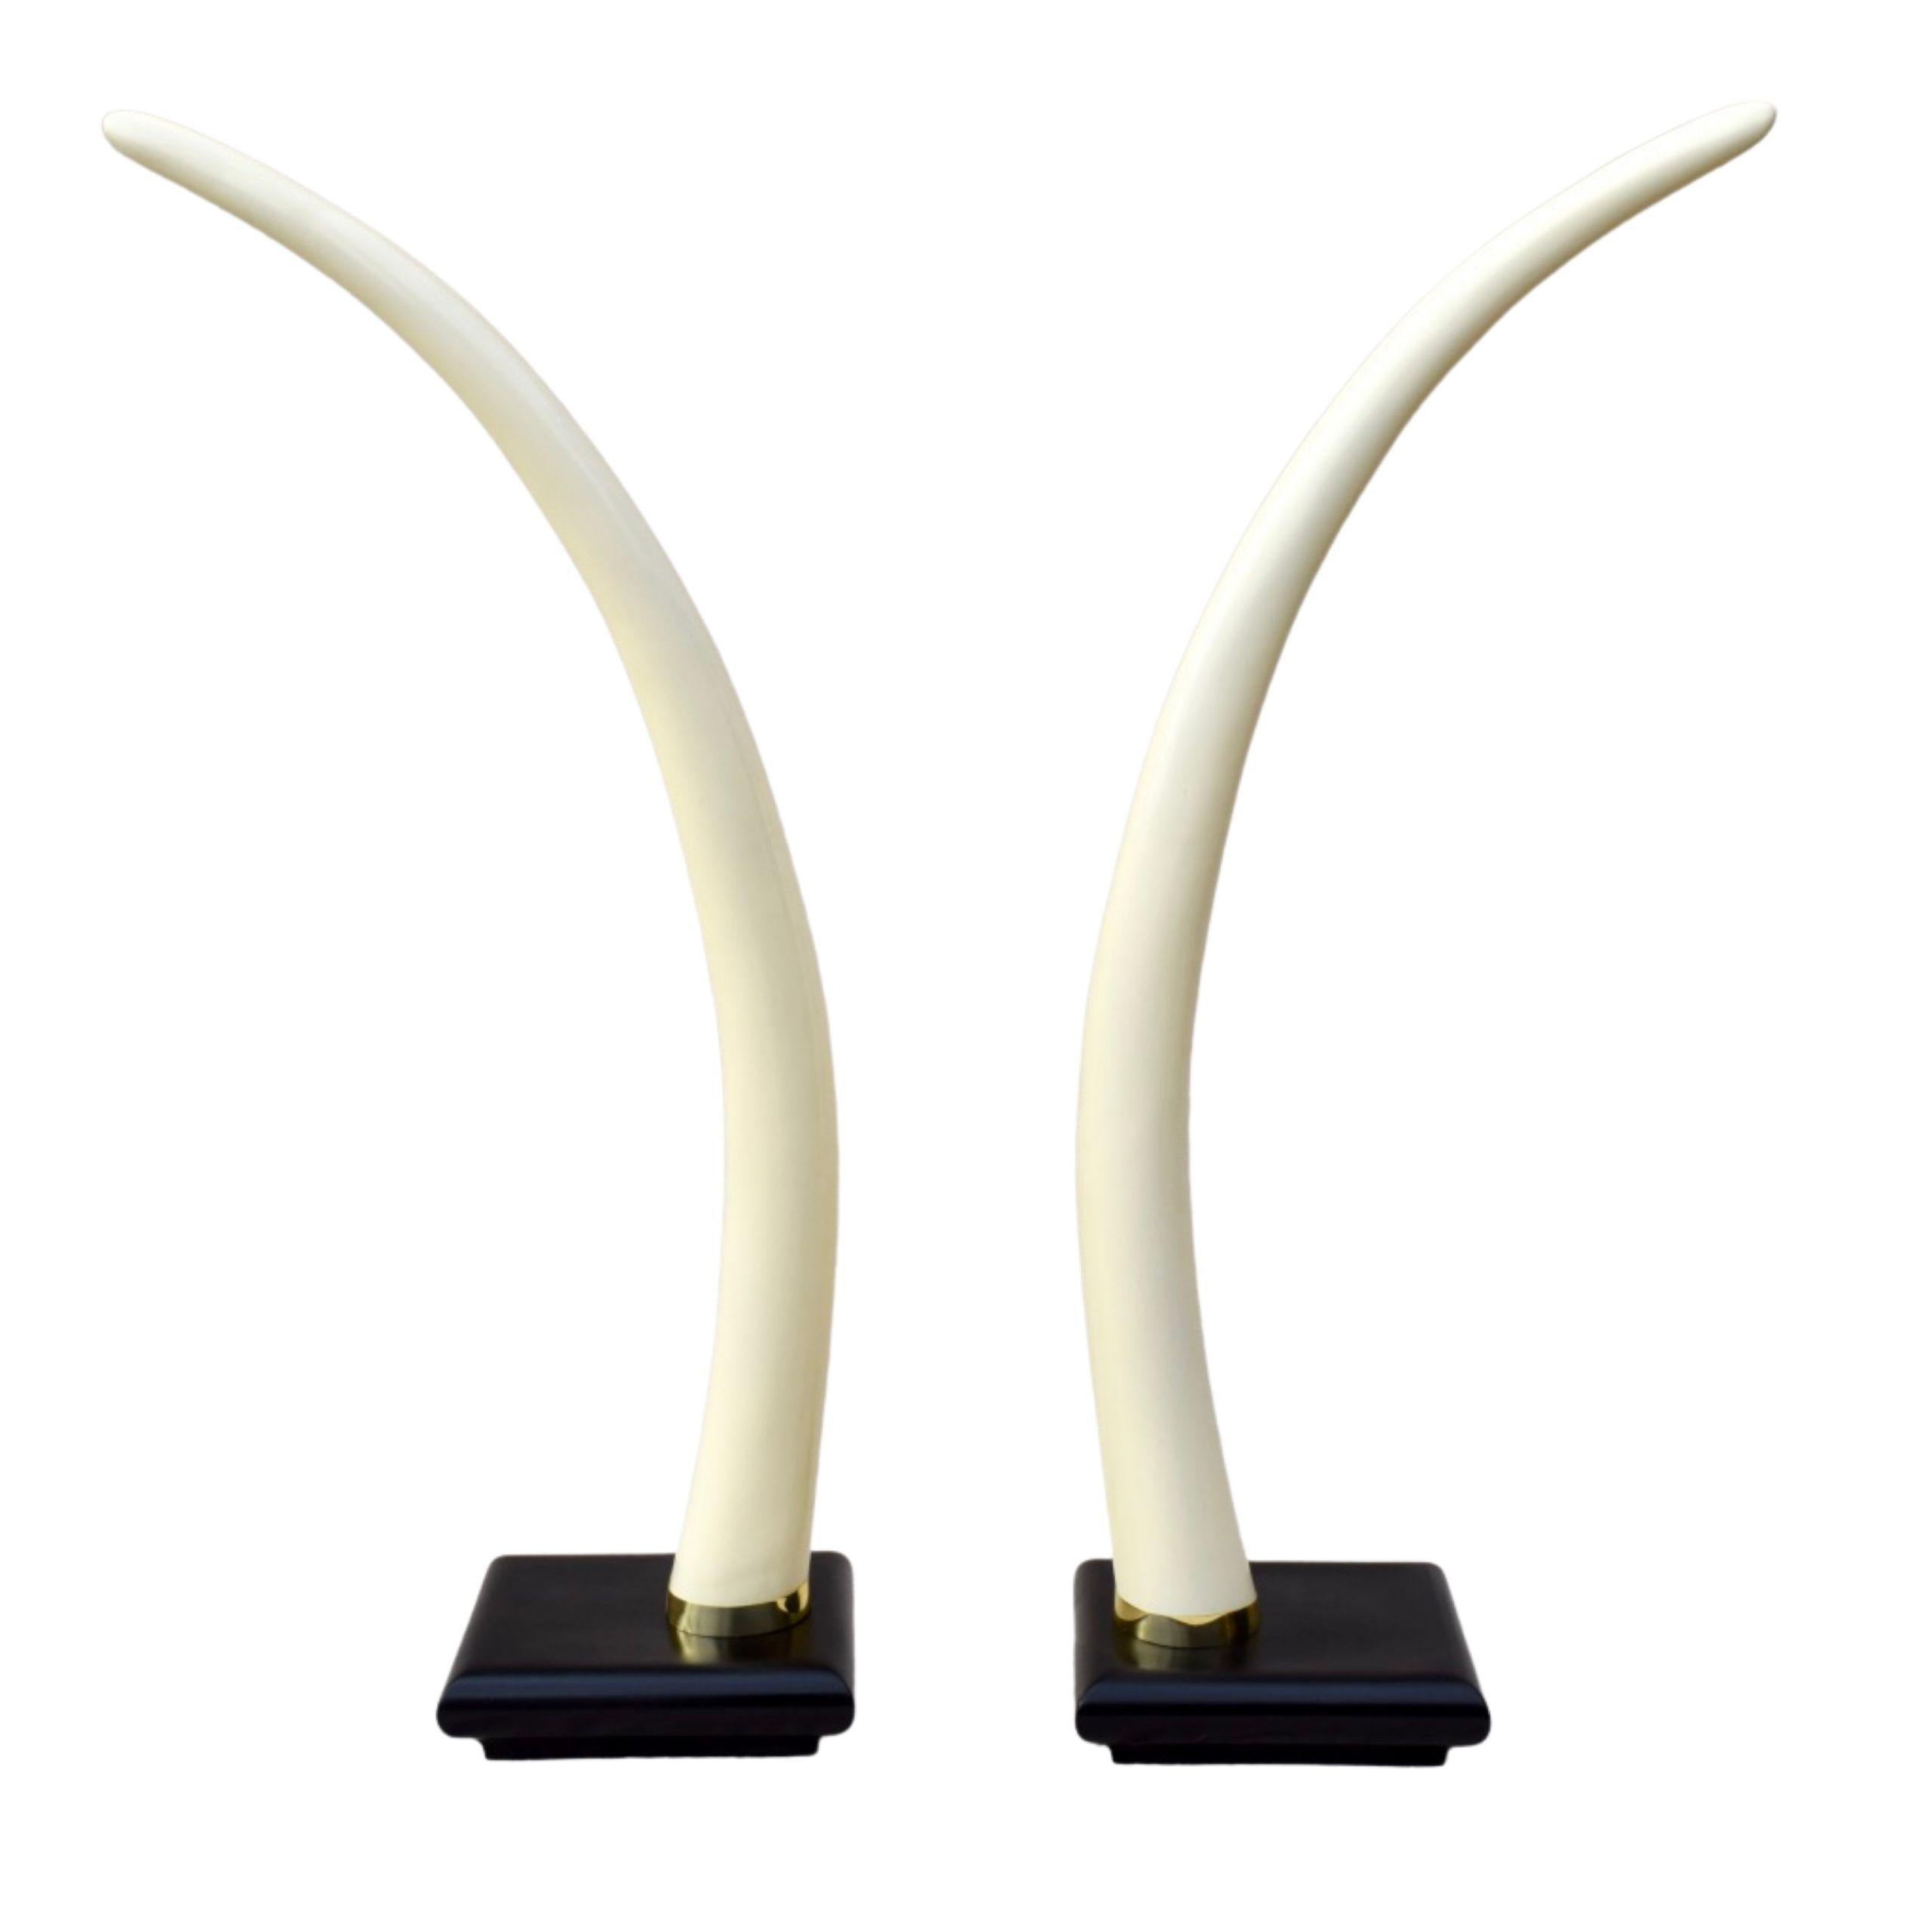 Late 20th Century 1970's Hollywood Regency Monumental Faux Tusks